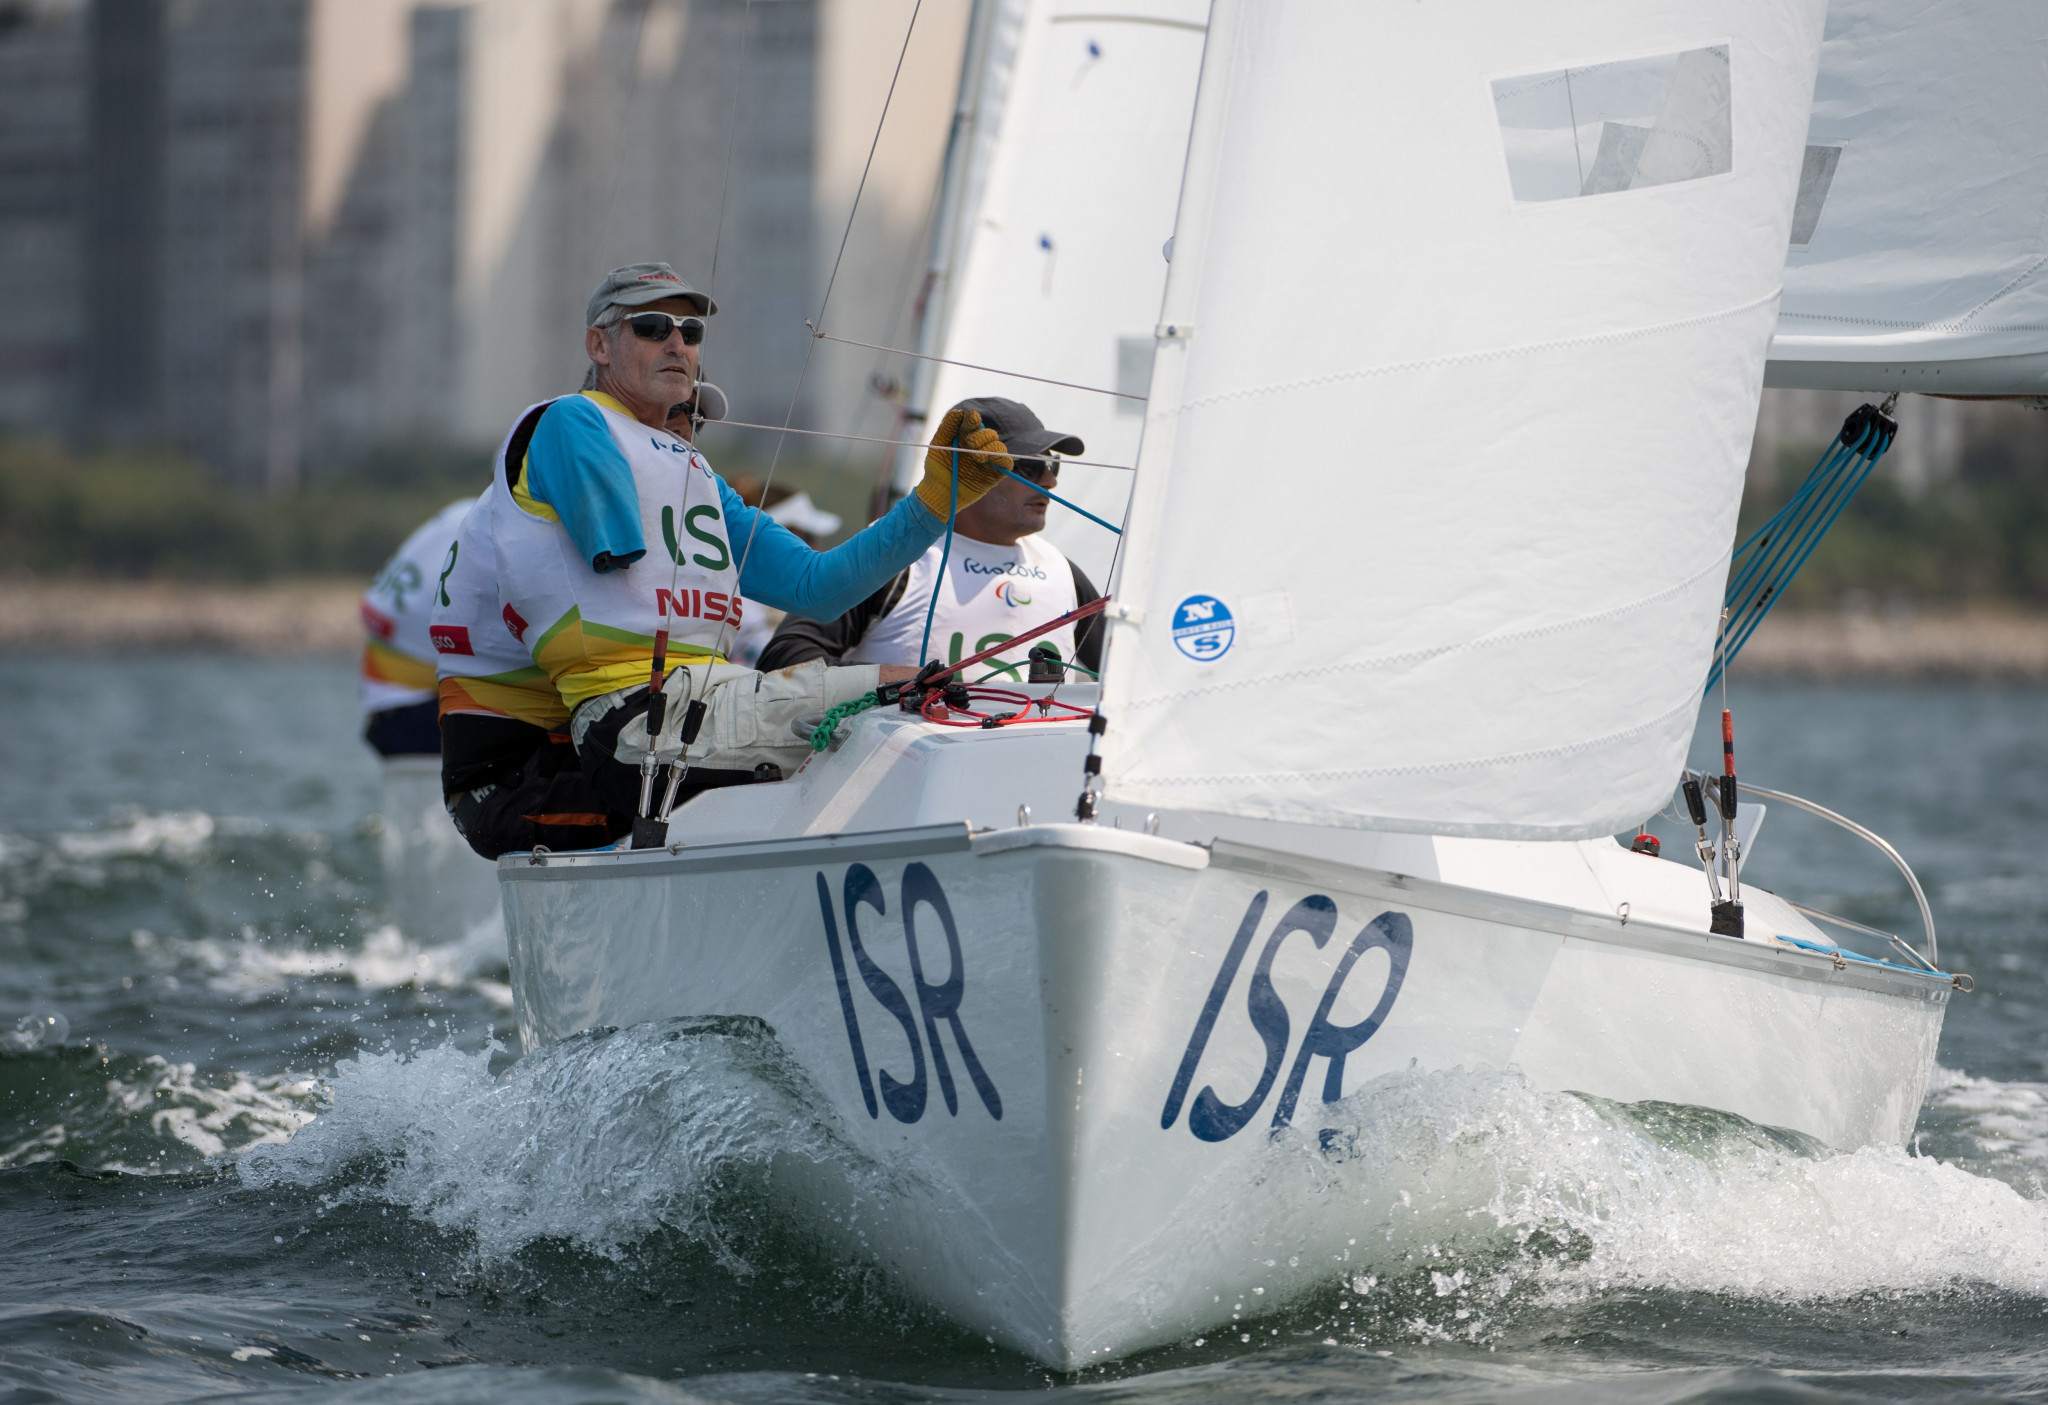 World Sailing "shocked" by IPC decision not to consider sport for inclusion at Paris 2024